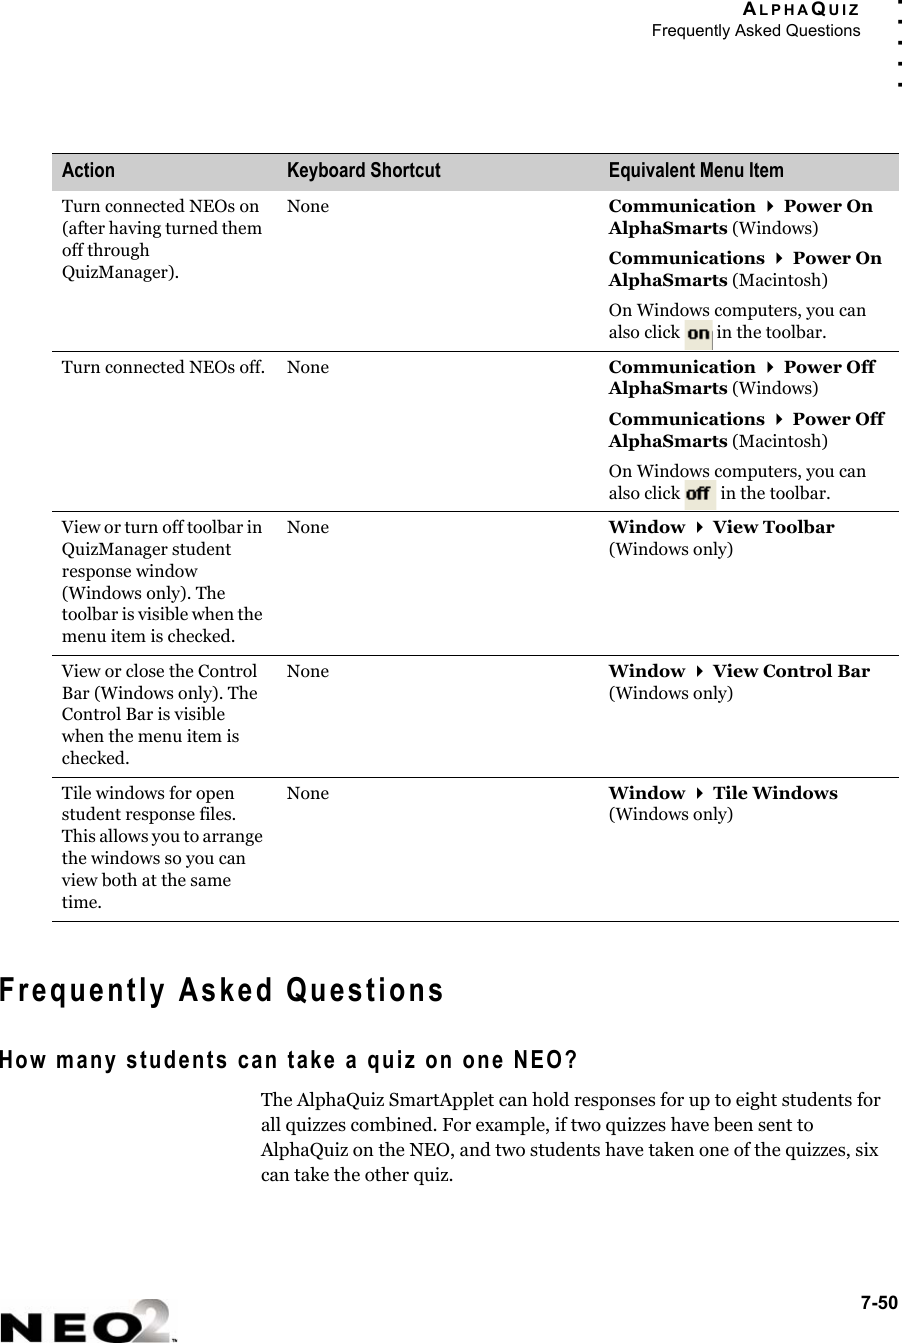 ALPHAQUIZFrequently Asked Questions7-50. . . . .Frequently Asked QuestionsHow many students can take a quiz on one NEO?The AlphaQuiz SmartApplet can hold responses for up to eight students for all quizzes combined. For example, if two quizzes have been sent to AlphaQuiz on the NEO, and two students have taken one of the quizzes, six can take the other quiz.Turn connected NEOs on (after having turned them off through QuizManager).None Communication  Power On AlphaSmarts (Windows)Communications  Power On AlphaSmarts (Macintosh)On Windows computers, you can also click   in the toolbar.Turn connected NEOs off. None Communication  Power Off AlphaSmarts (Windows)Communications  Power Off AlphaSmarts (Macintosh)On Windows computers, you can also click   in the toolbar.View or turn off toolbar in QuizManager student response window (Windows only). The toolbar is visible when the menu item is checked.None Window  View Toolbar (Windows only)View or close the Control Bar (Windows only). The Control Bar is visible when the menu item is checked.None Window  View Control Bar (Windows only)Tile windows for open student response files. This allows you to arrange the windows so you can view both at the same time.None Window  Tile Windows (Windows only)Action Keyboard Shortcut Equivalent Menu Item